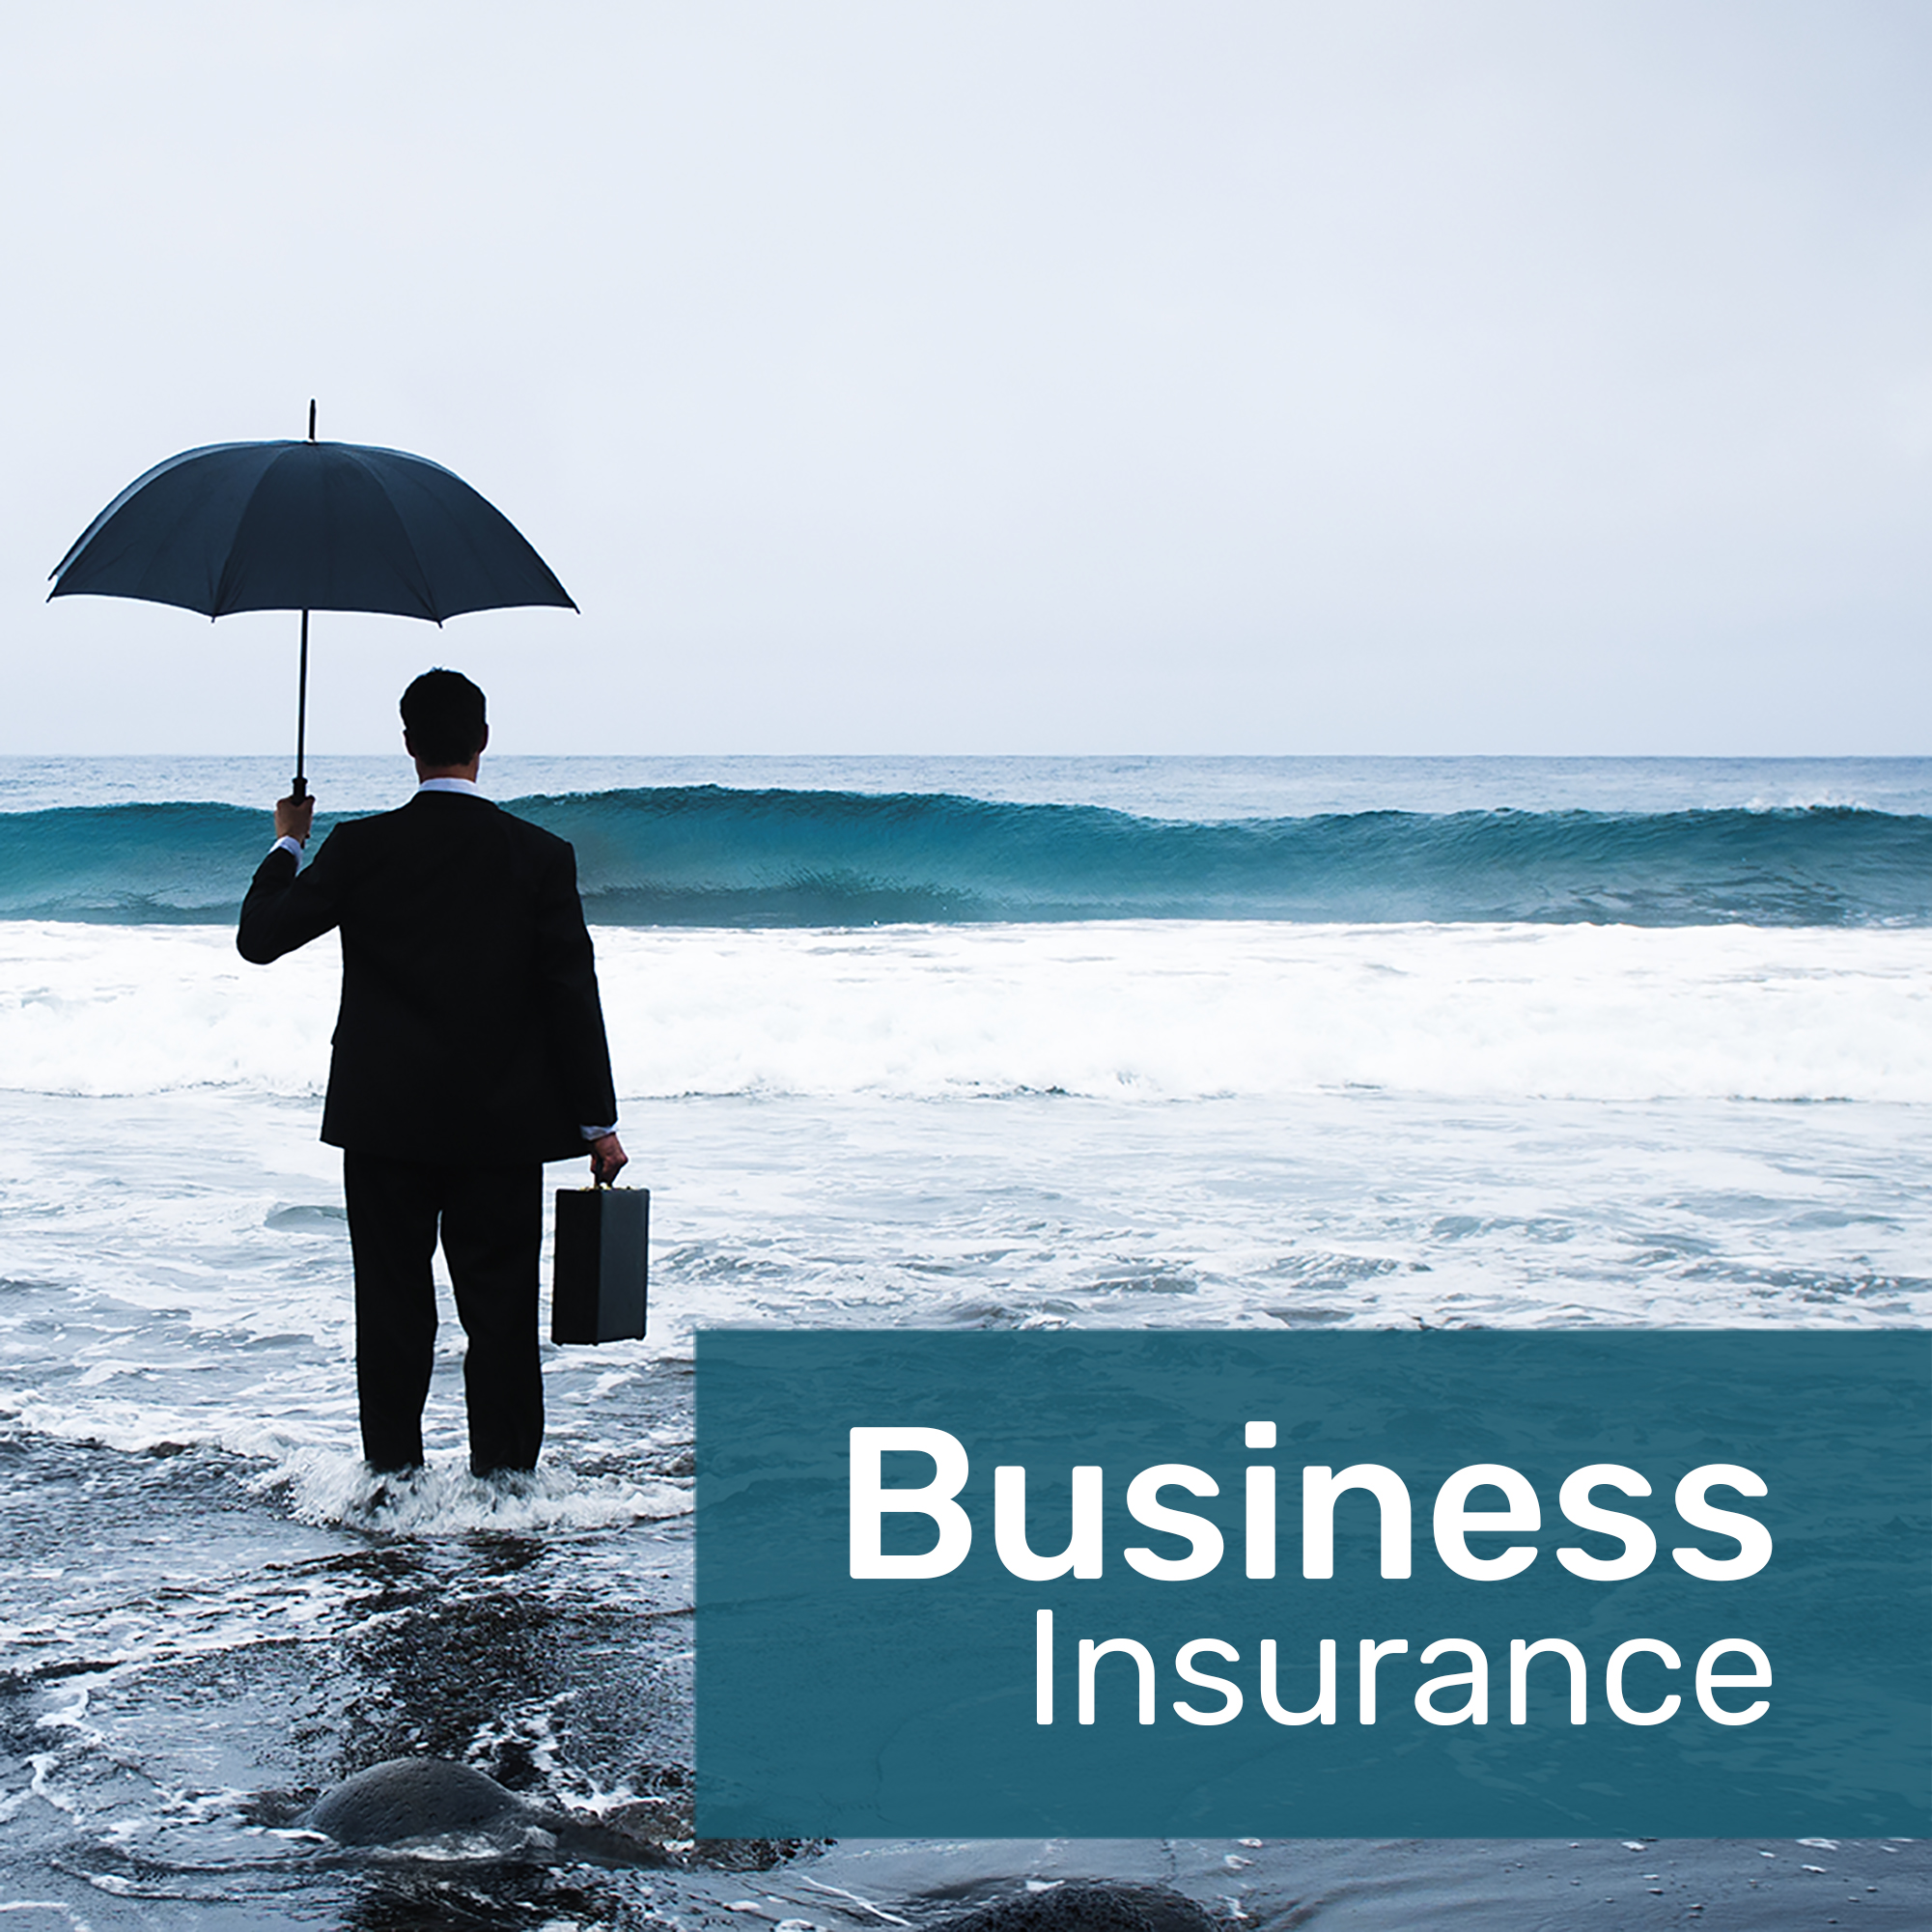 Business insurance template psd for social media with editable text